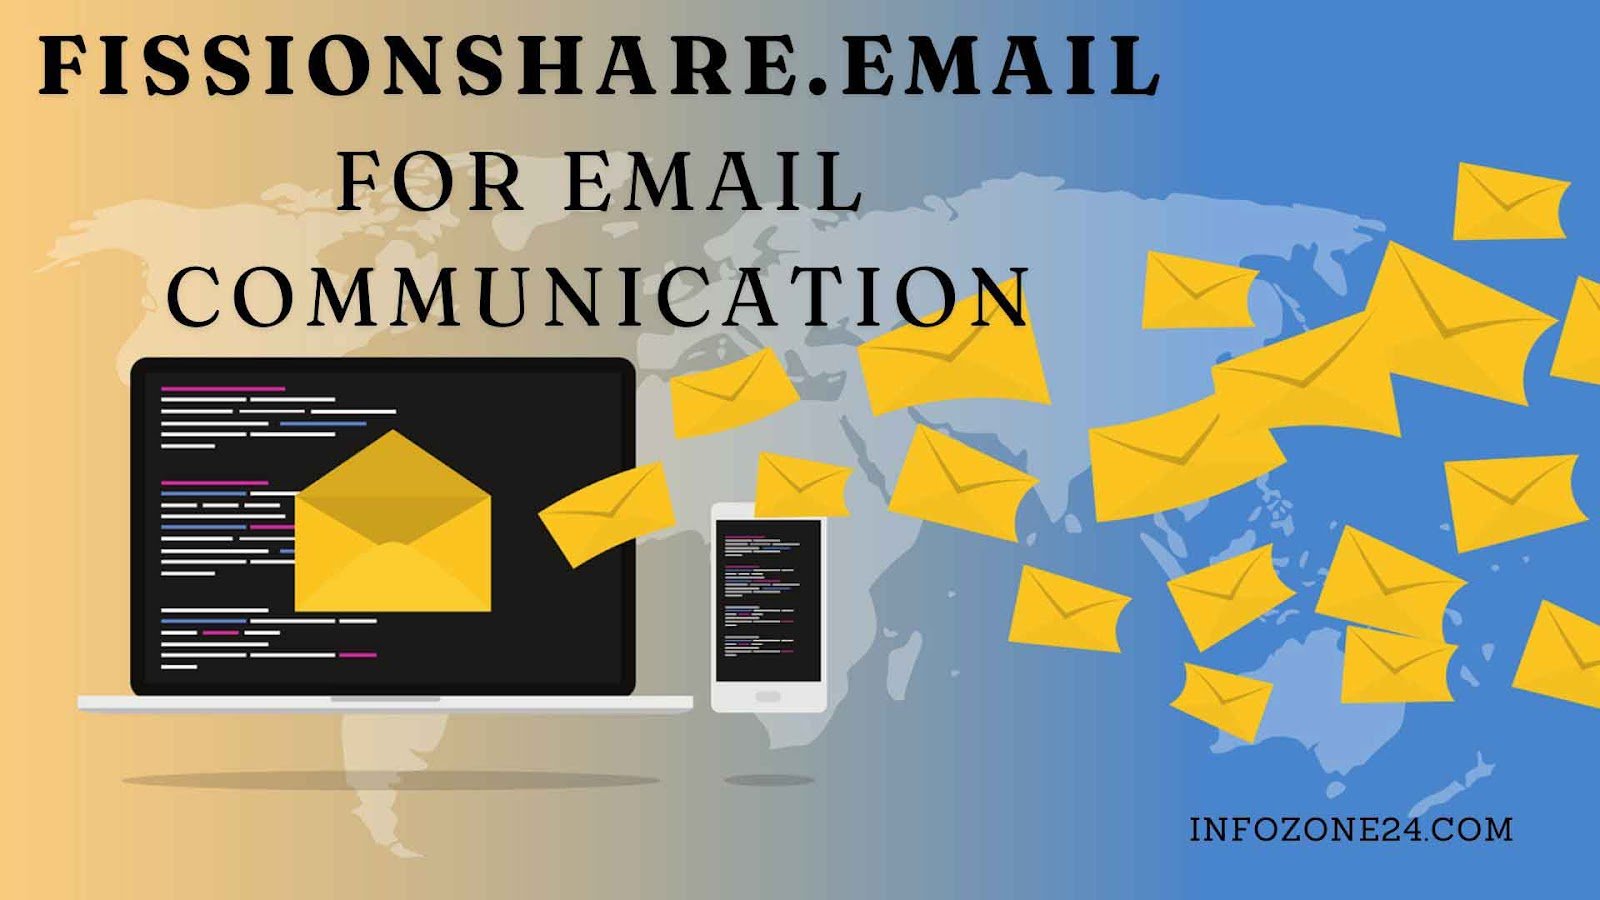 Fissionshare.email For Email Communication